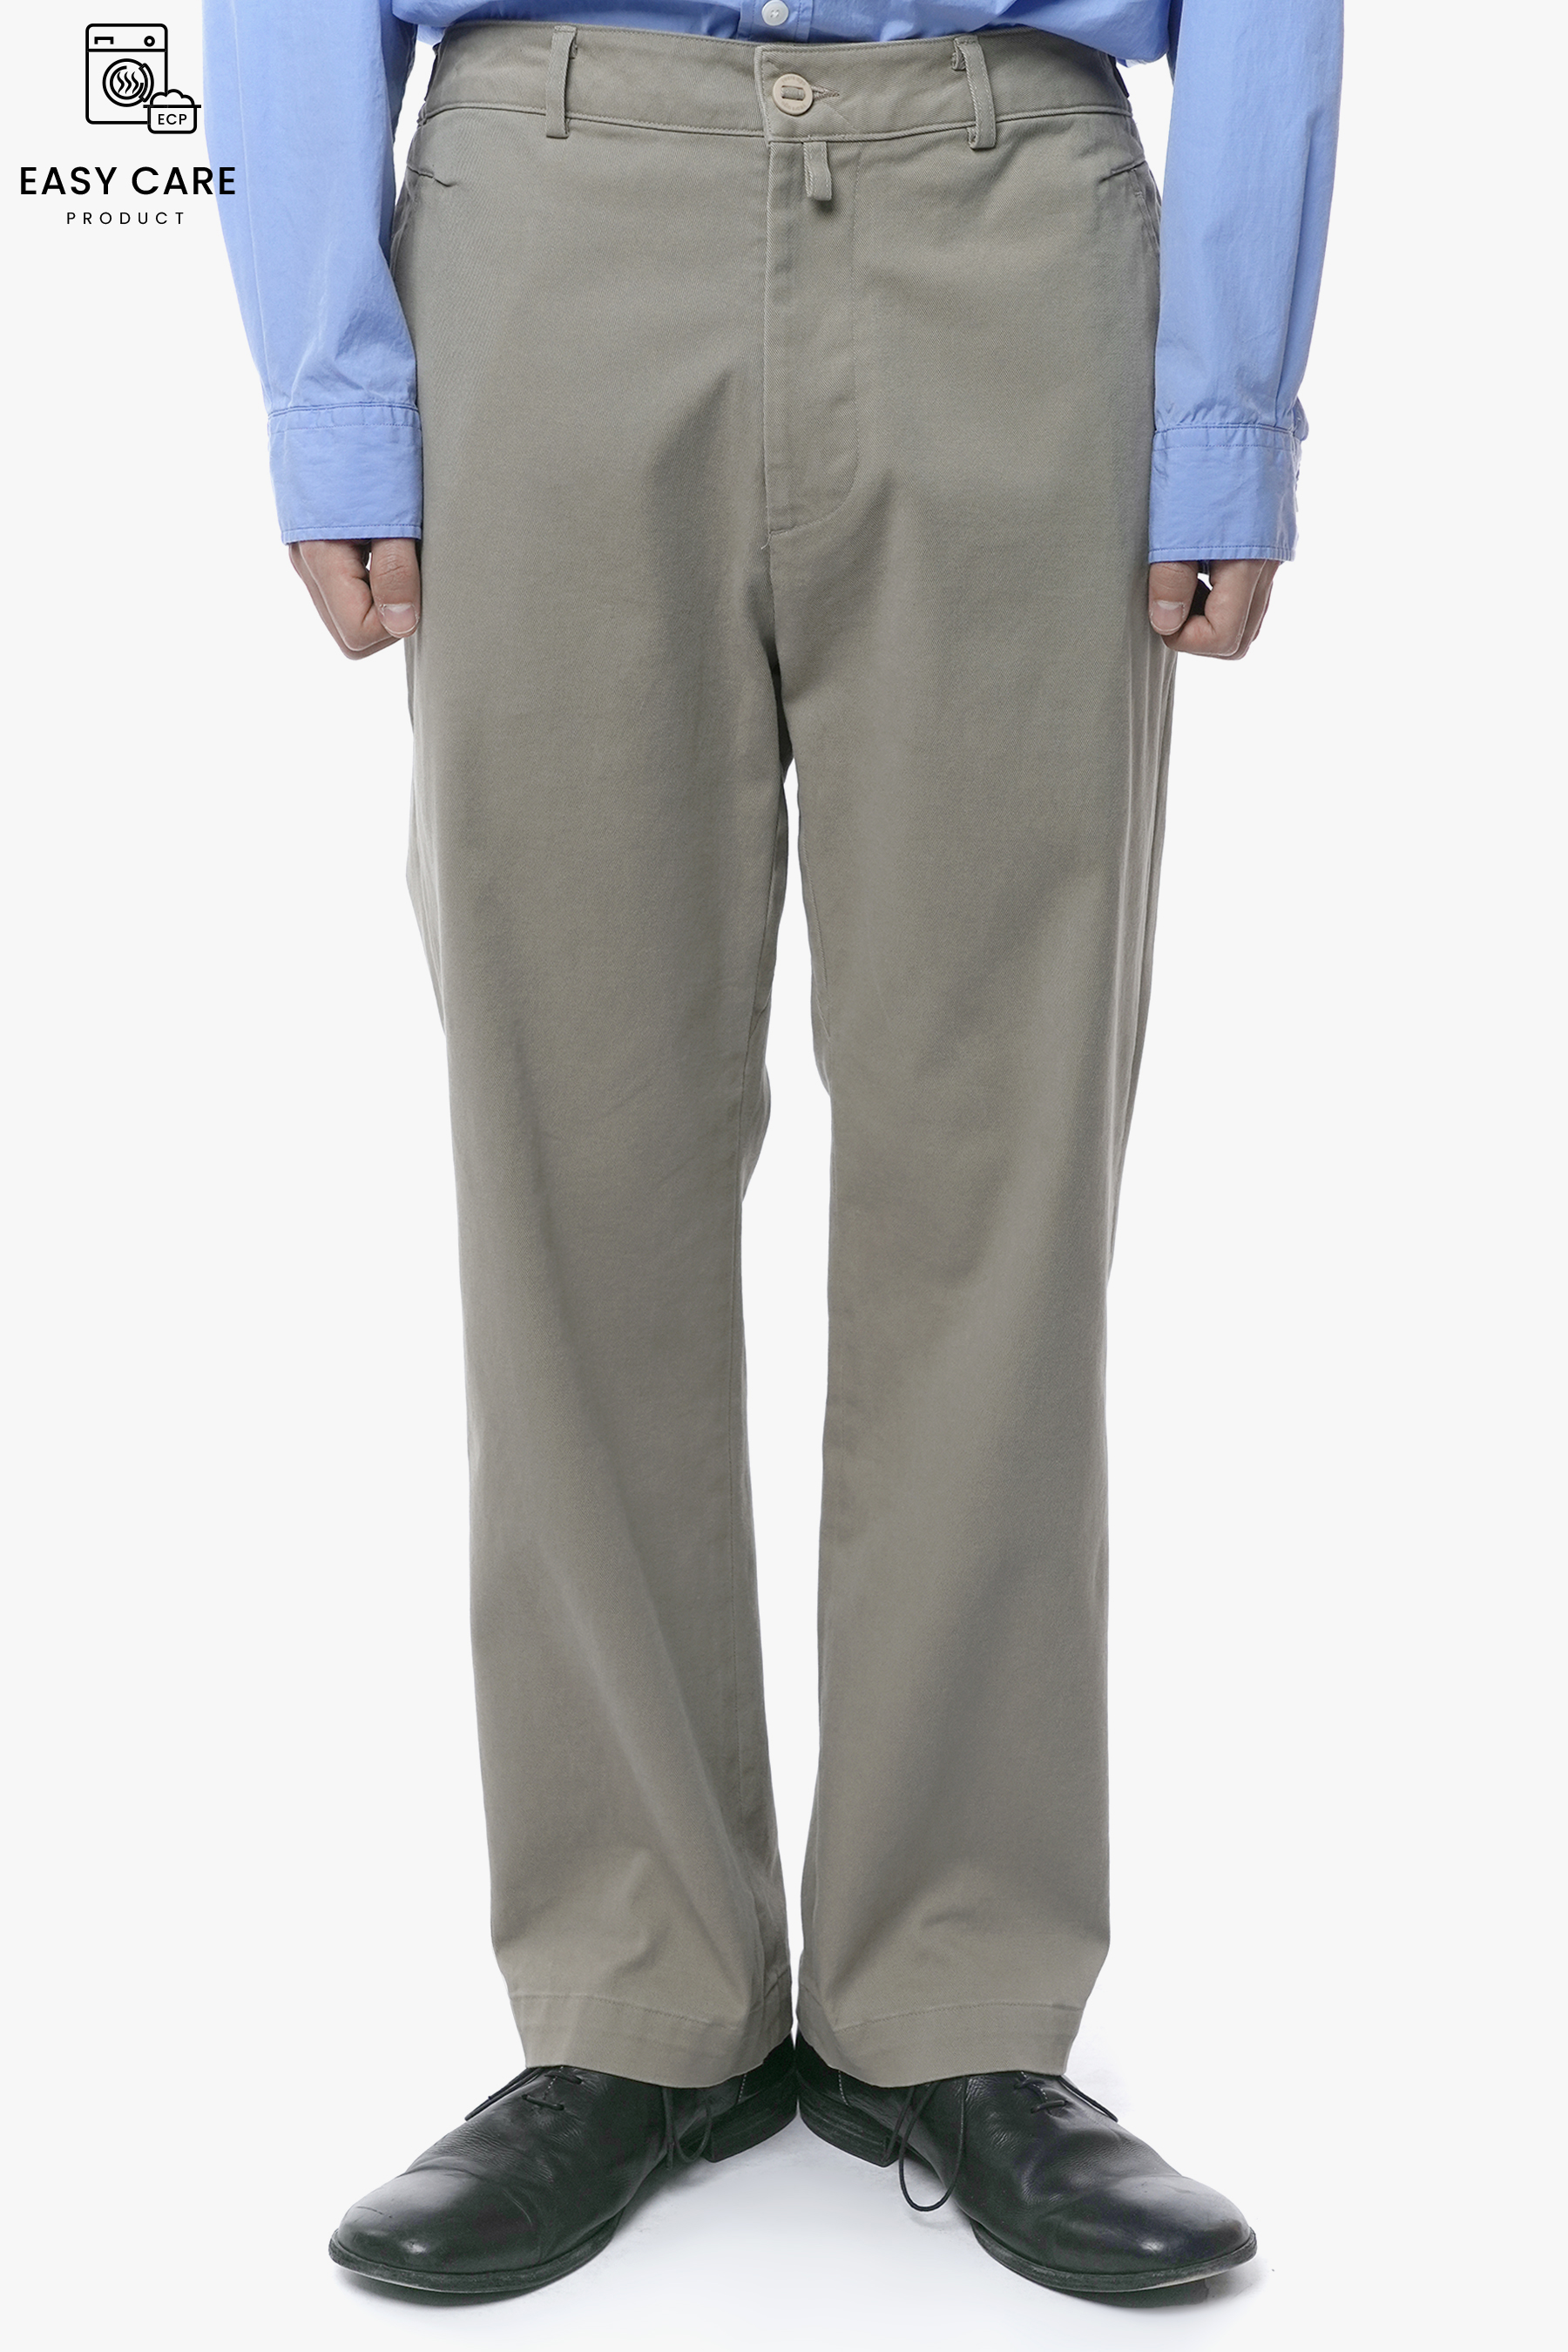 OYSTER Y-901 WASHED STRETCH COTTON DRILL STRAIGHT CHINO PANTS V.2 (ECP GARMENT PROCESS)